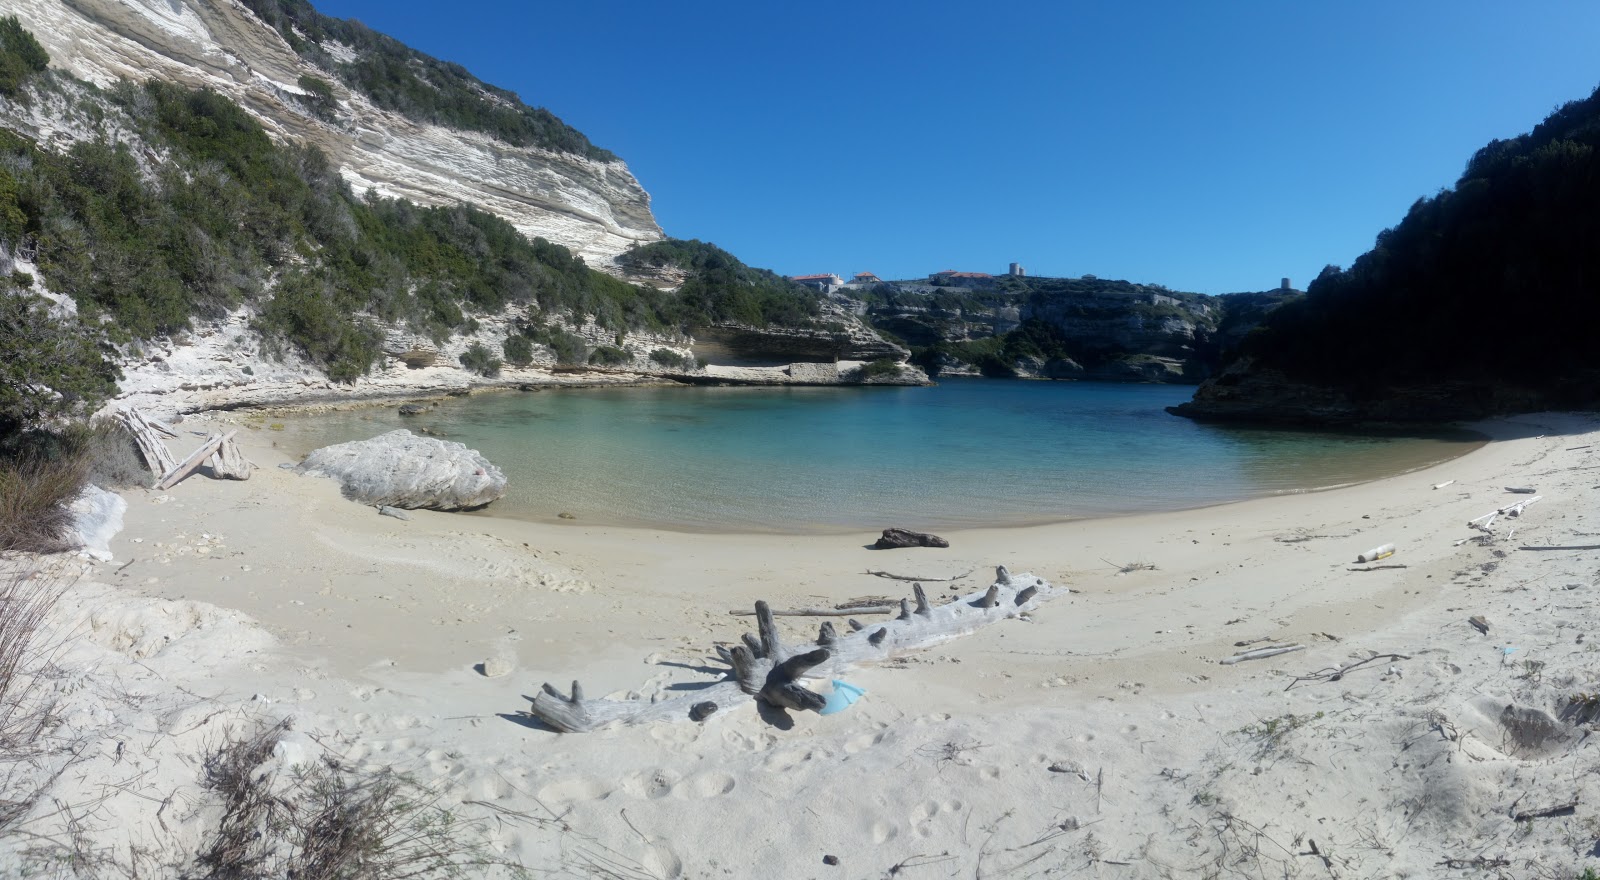 Photo of Plage de l'Arinella and its beautiful scenery